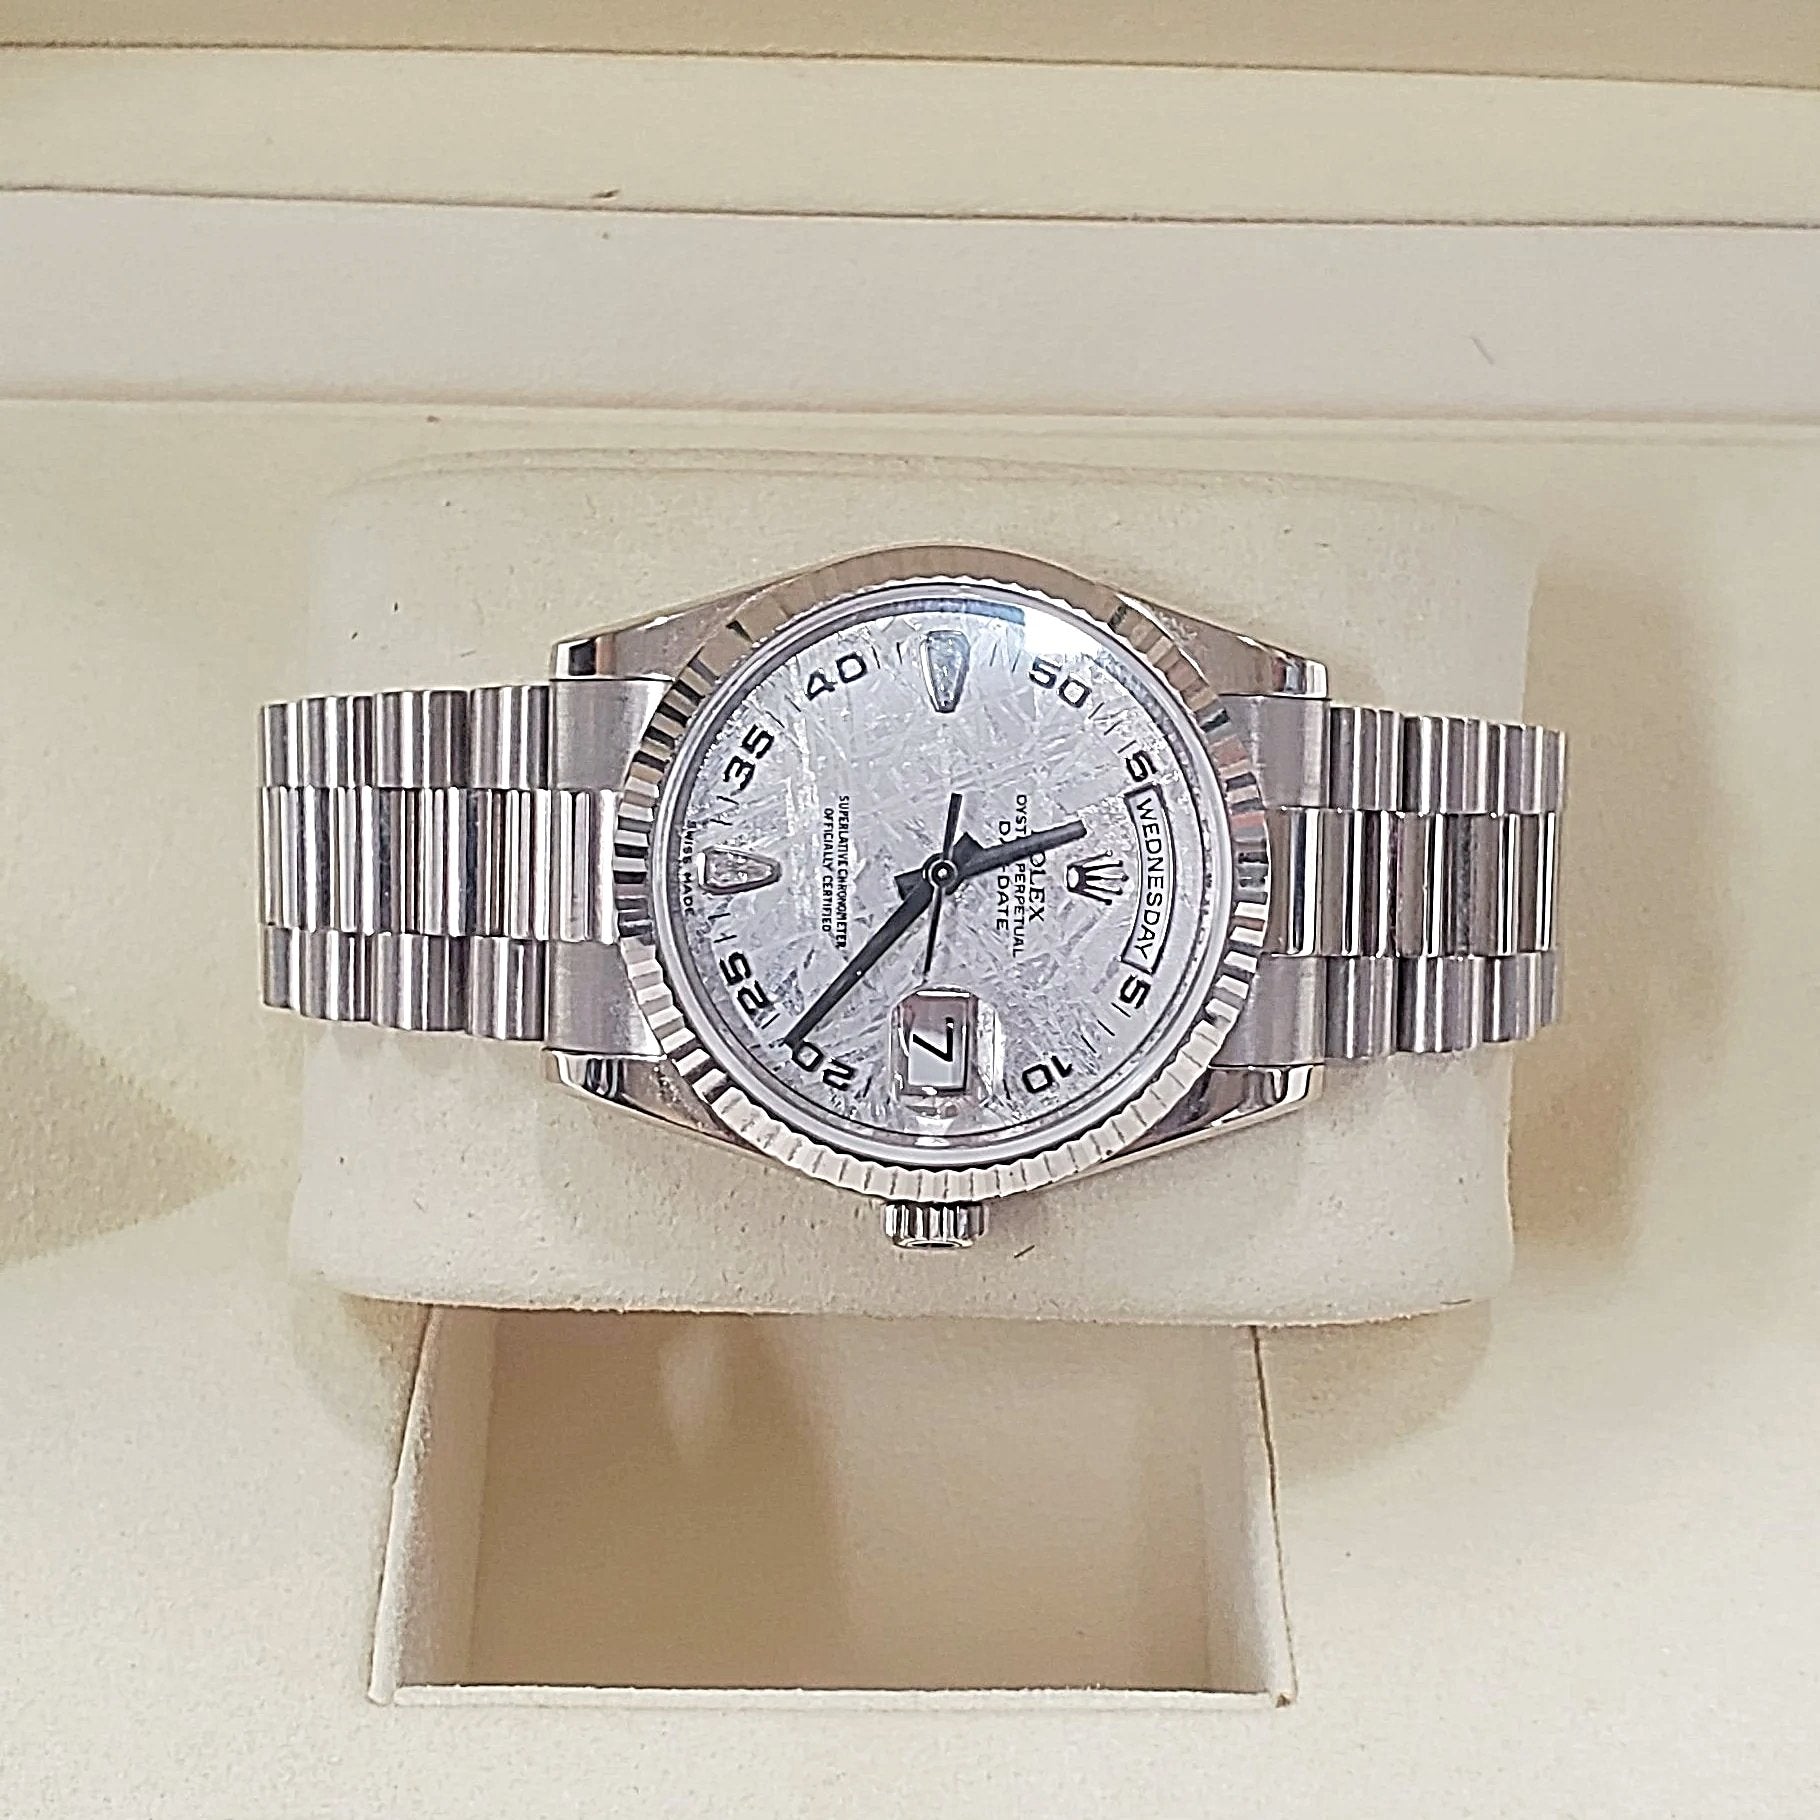 Men's Rolex 36mm Presidential 18K White Gold Watch with Diamond Meteorite Dial and Fluted Bezel. (Pre-Owned)